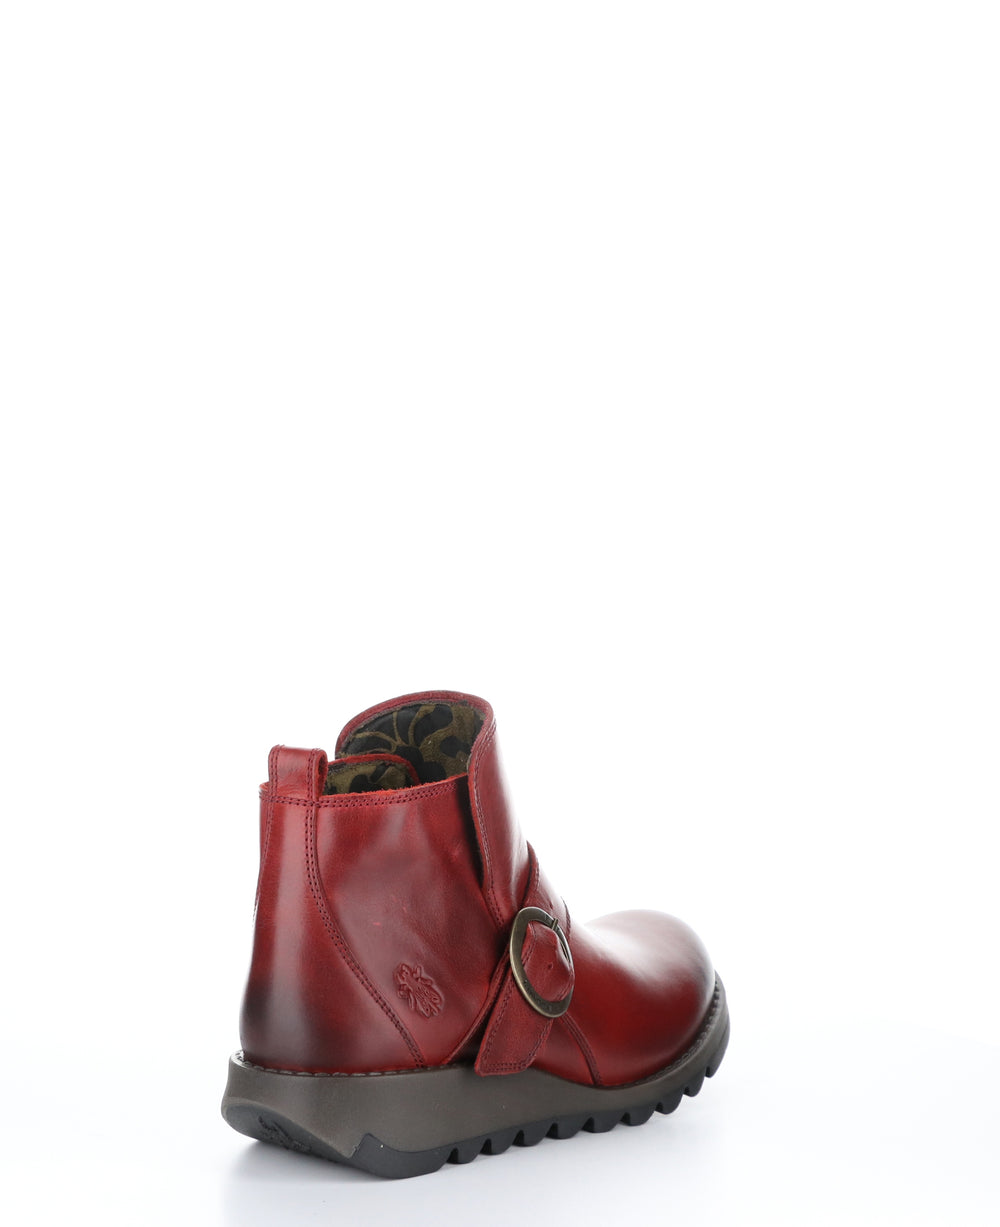 SIAS812FLY Red Zip Up Ankle Boots